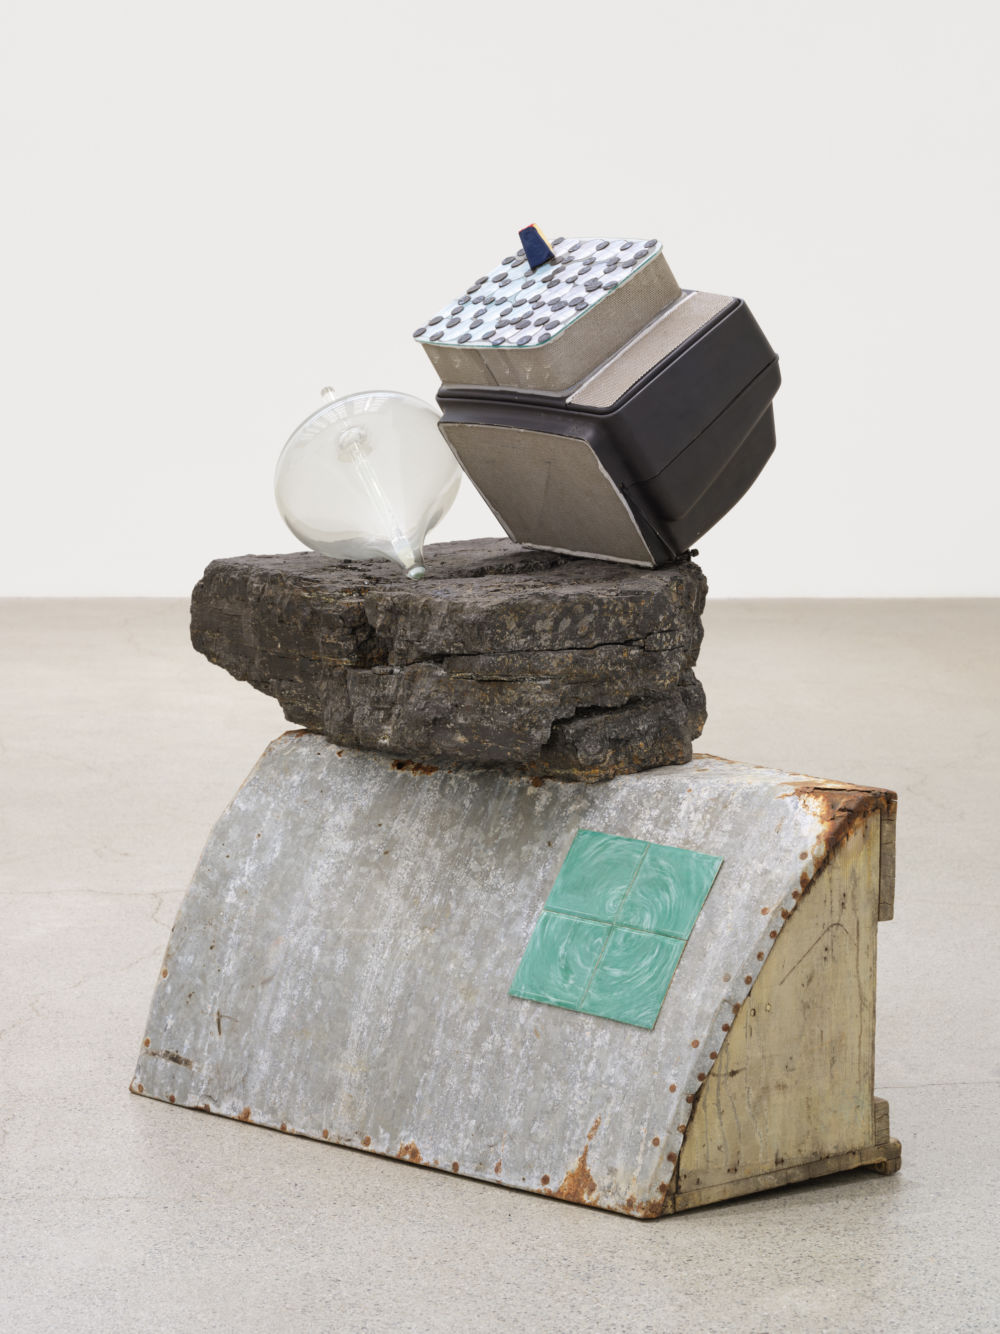 Jerry Pethick, Floating Free, 1972–93, wood, galvanized metal, plastic, coal, TV, duratrans, blown glass, lenses, aluminum, tiles, silicon, 42 3/4 x 26 1/2 x 41 1/2 in. (109 x 67 x 105 cm) by 